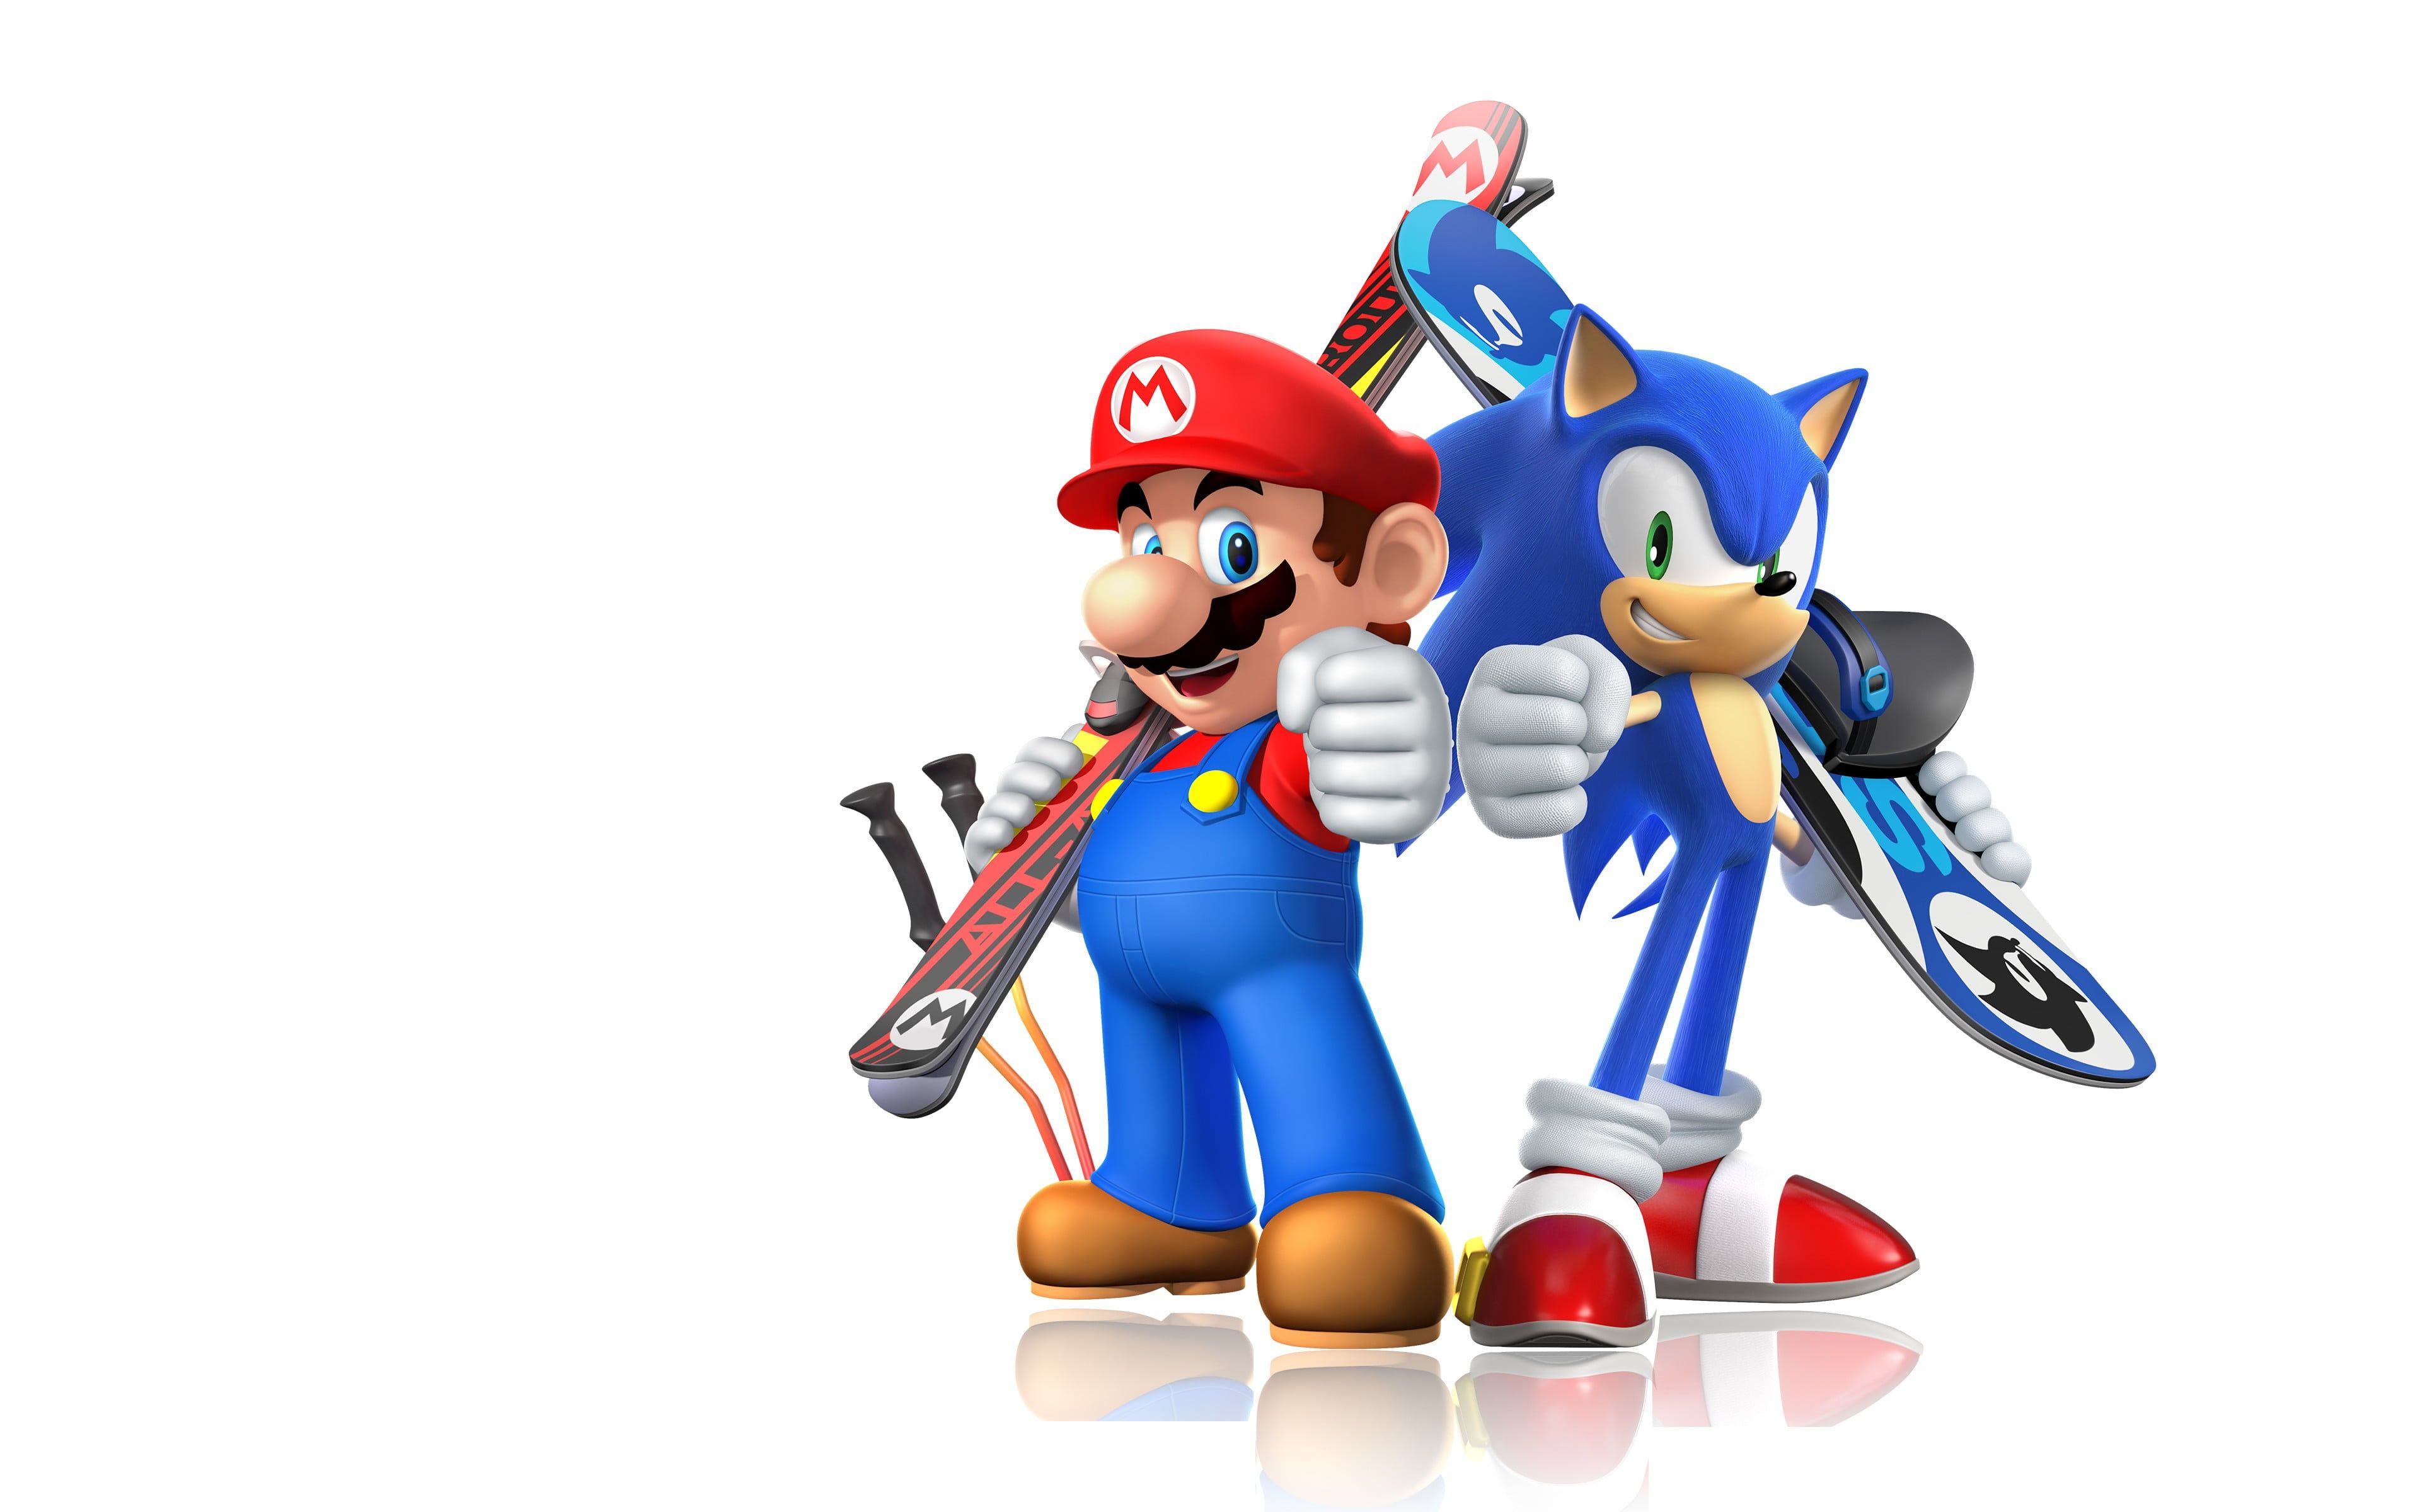 Super Mario and Sonic wall paper Mario Bros. Sonic the Hedgehog video games #skis #snowboards simple background Mario and. Sonic the hedgehog, Sonic, Super mario